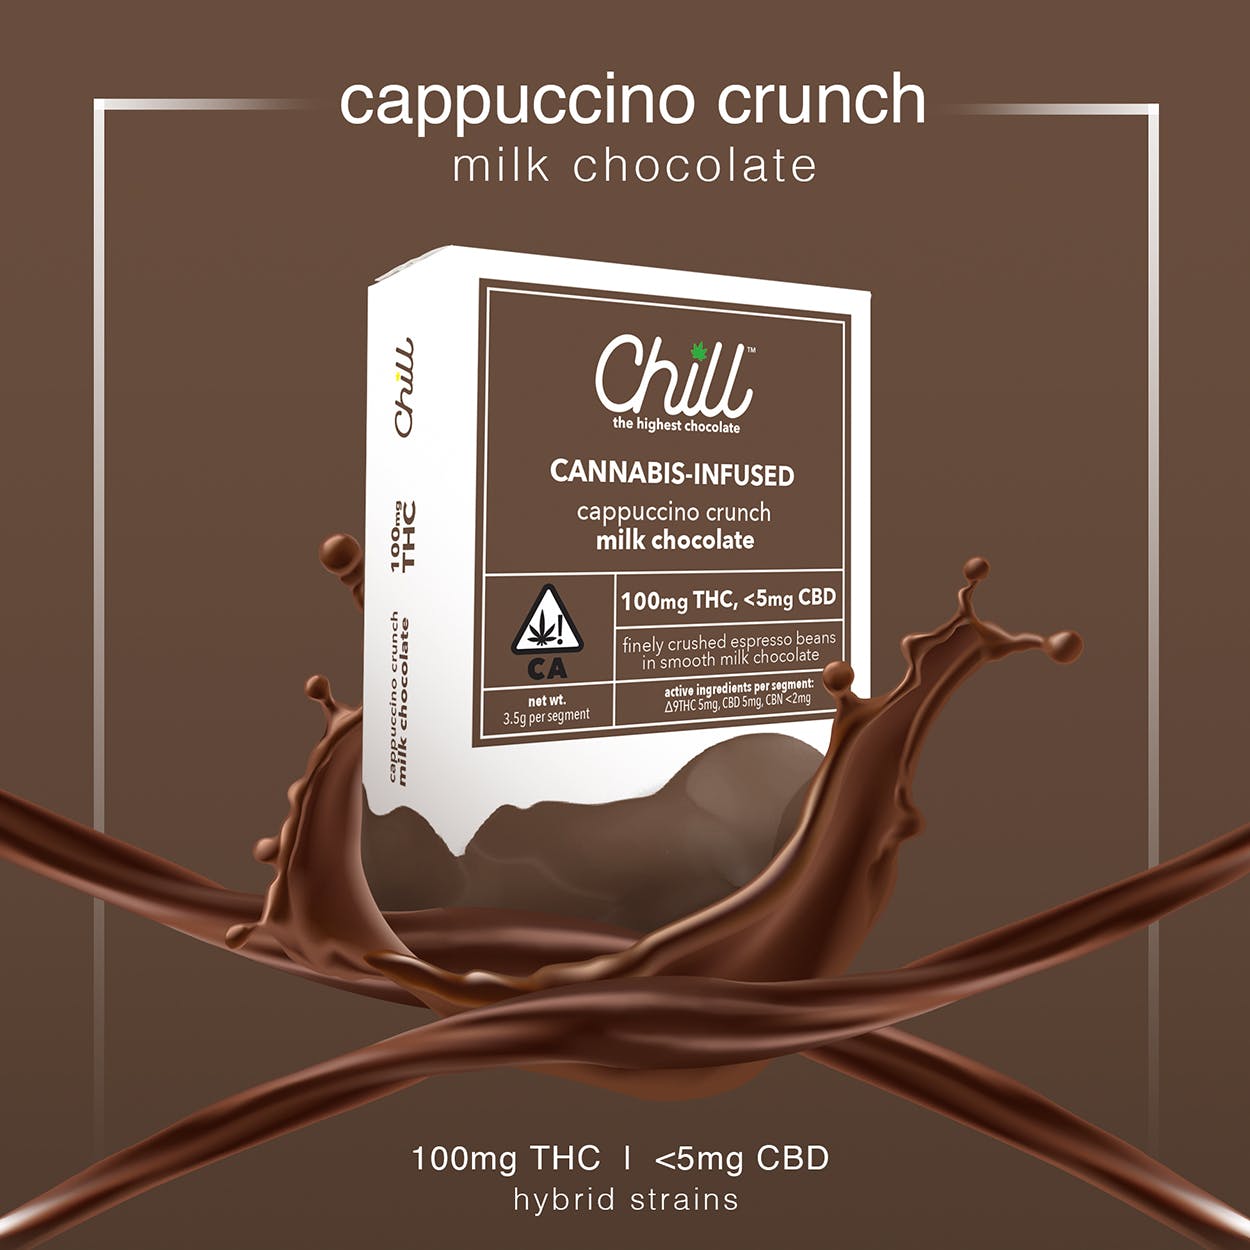 Chill This truly is The Highest Chocolate - Cappuccino Crunch